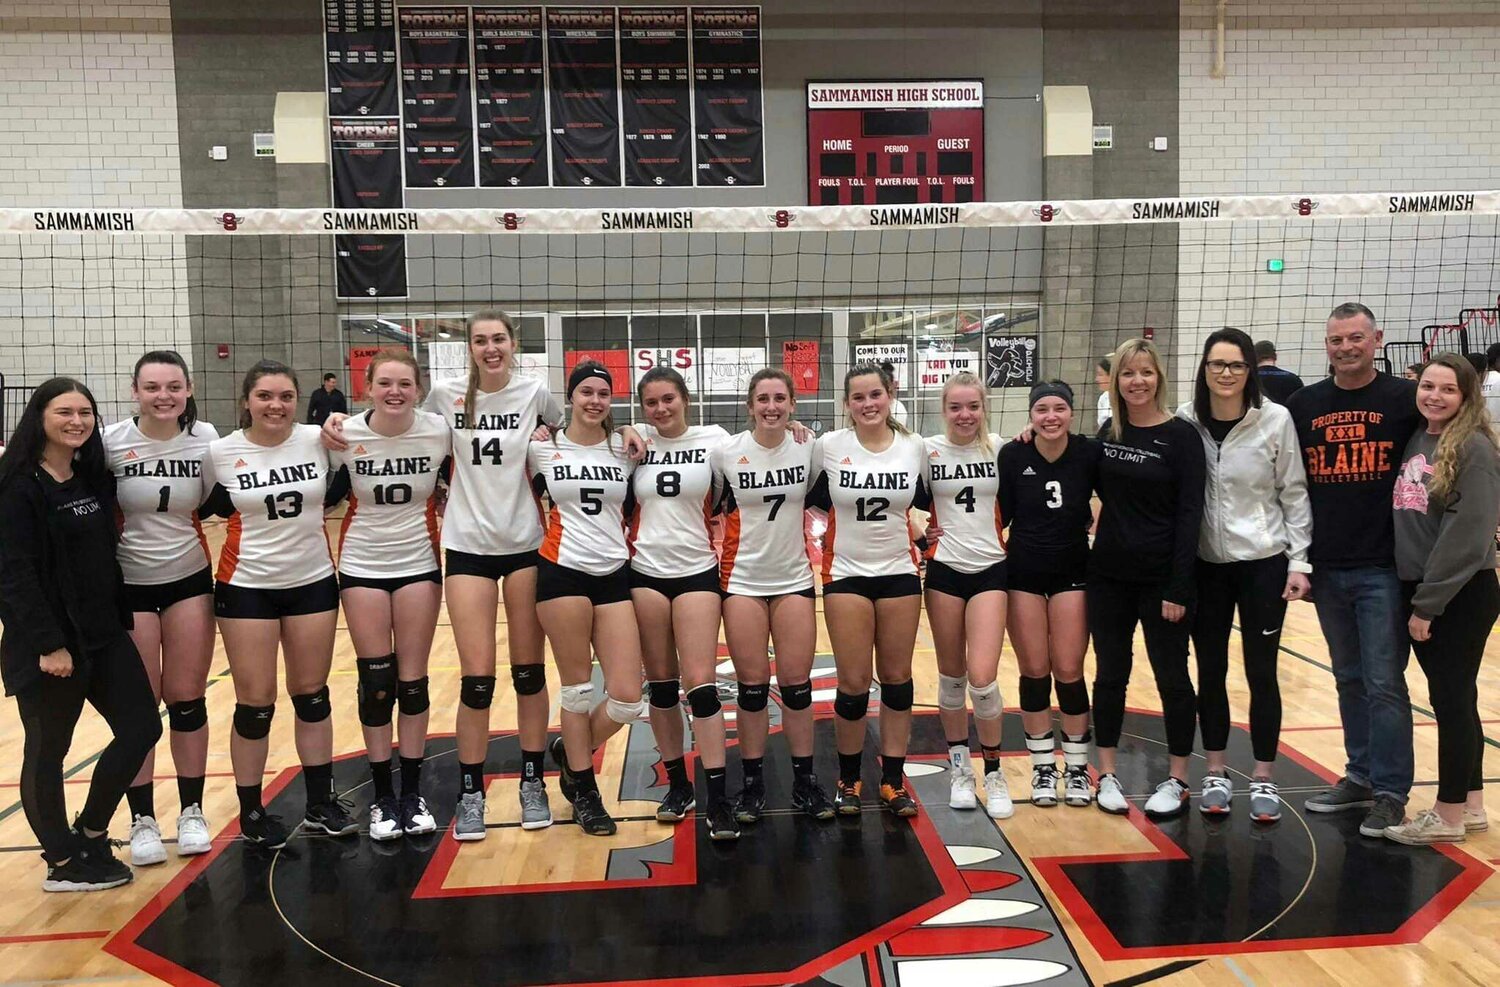 Blaine volleyball coach Jacquie Smith, r., with the 2018 Borderite volleyball team that broke a 20-year state playoff drought. The varsity team placed 9th and earned Smith the 2019 Blaine coach of the year award. Smith spent the past decade coaching Blaine varsity, junior varsity and middle school volleyball.